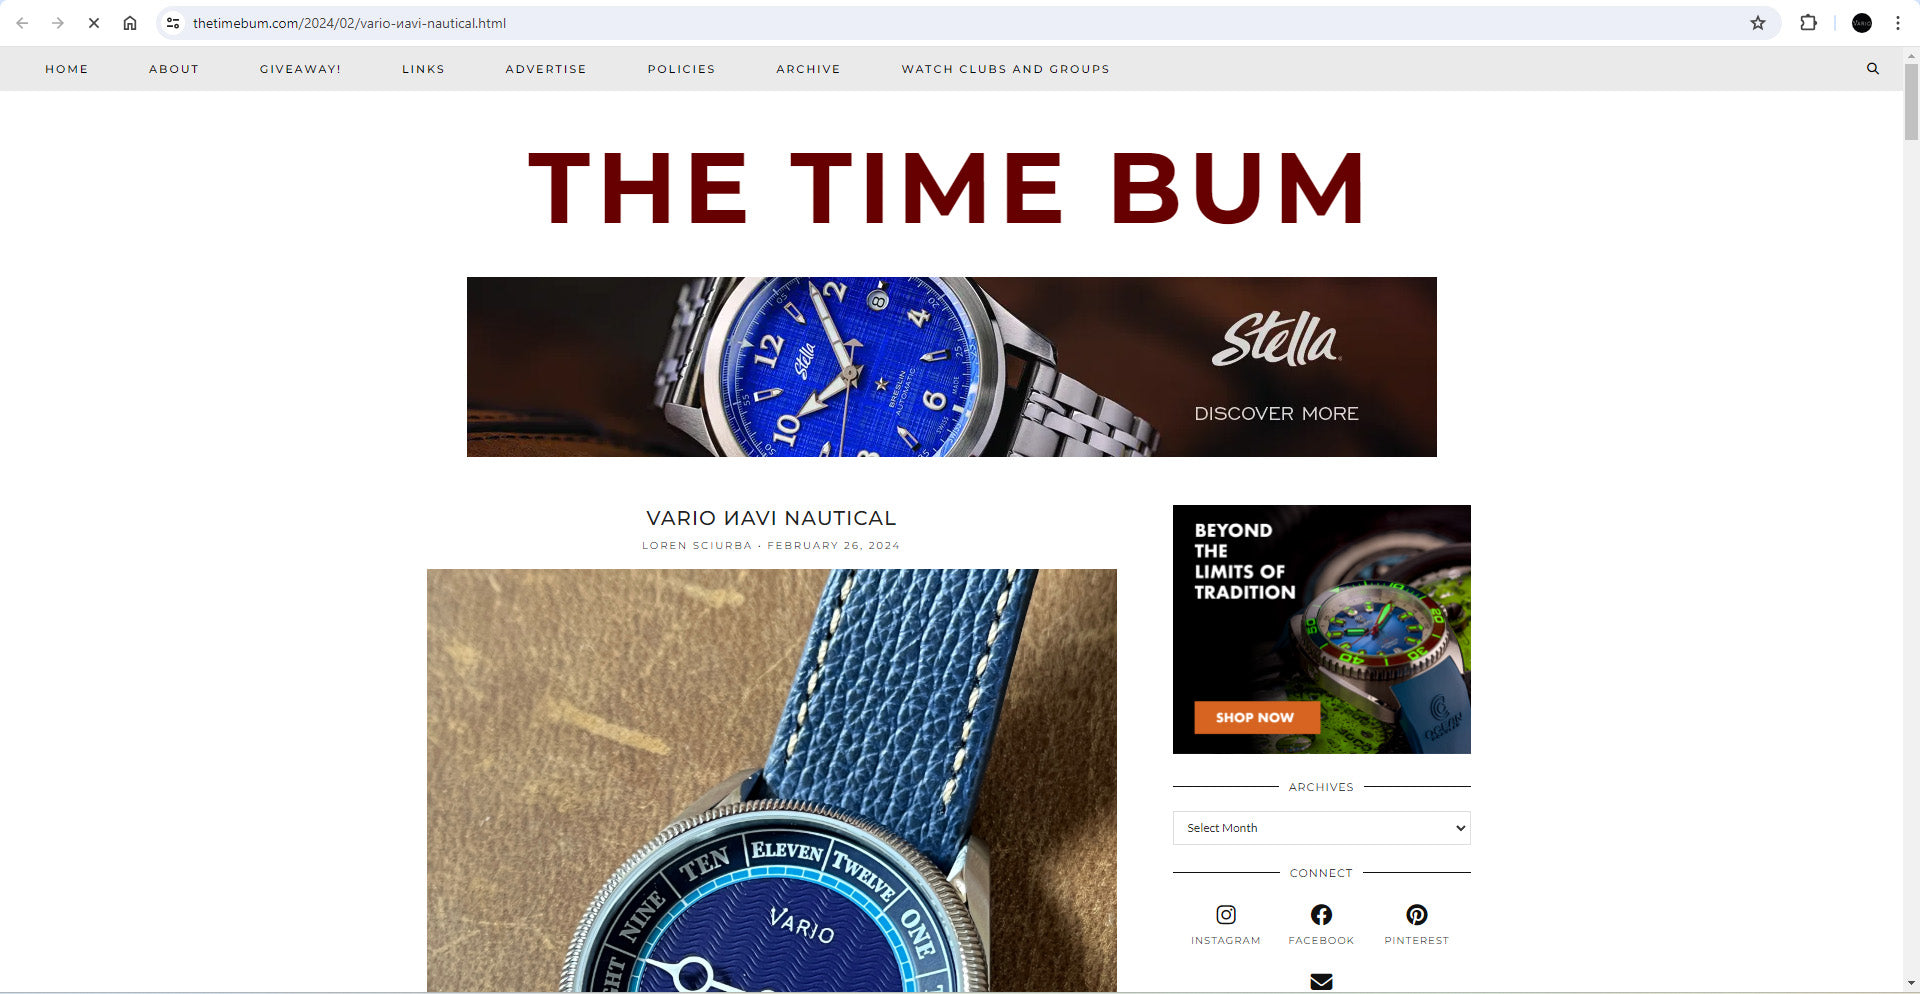 Vario ИAVI Single Hand Watch featured on The Time Bum